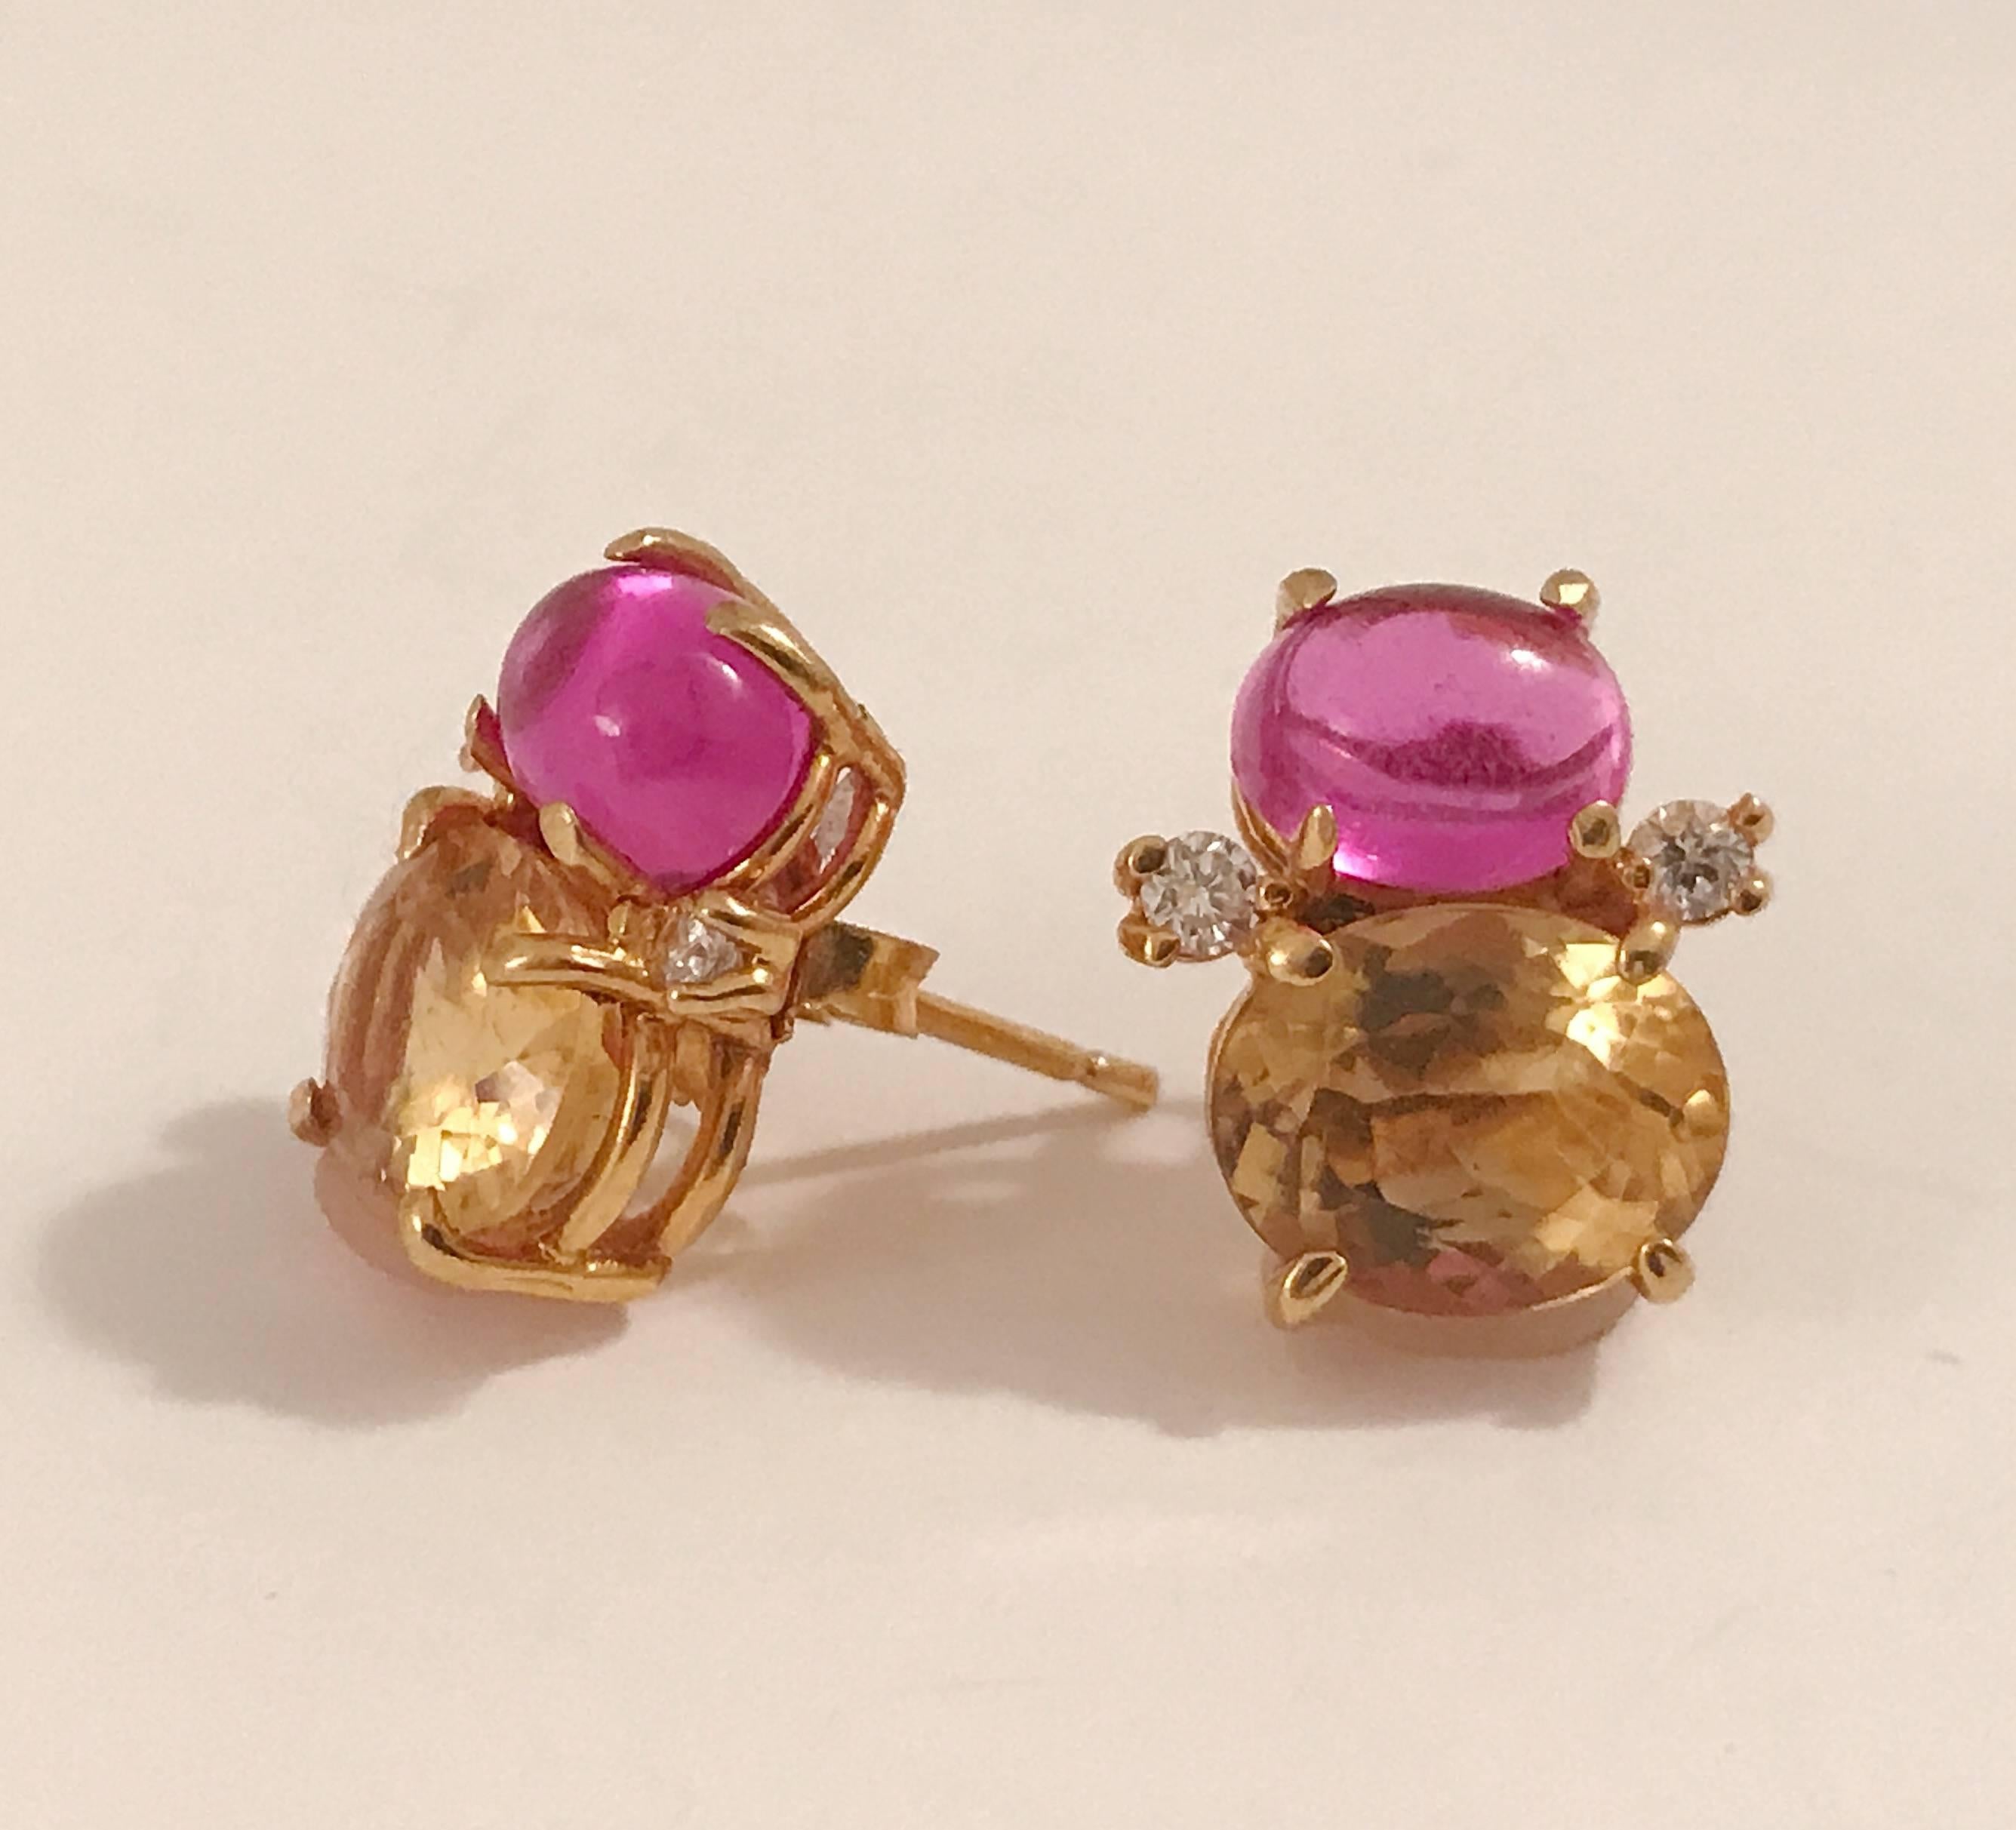 Mini 18kt Yellow Gold GUM DROP™ earrings with Cabochon Pink Topaz (approximately 2 cts each), Faceted Citrine (approximately 3 cts each), and 4 diamonds weighing ~ 0.20 cts. 

Specifications: Height: 5/8